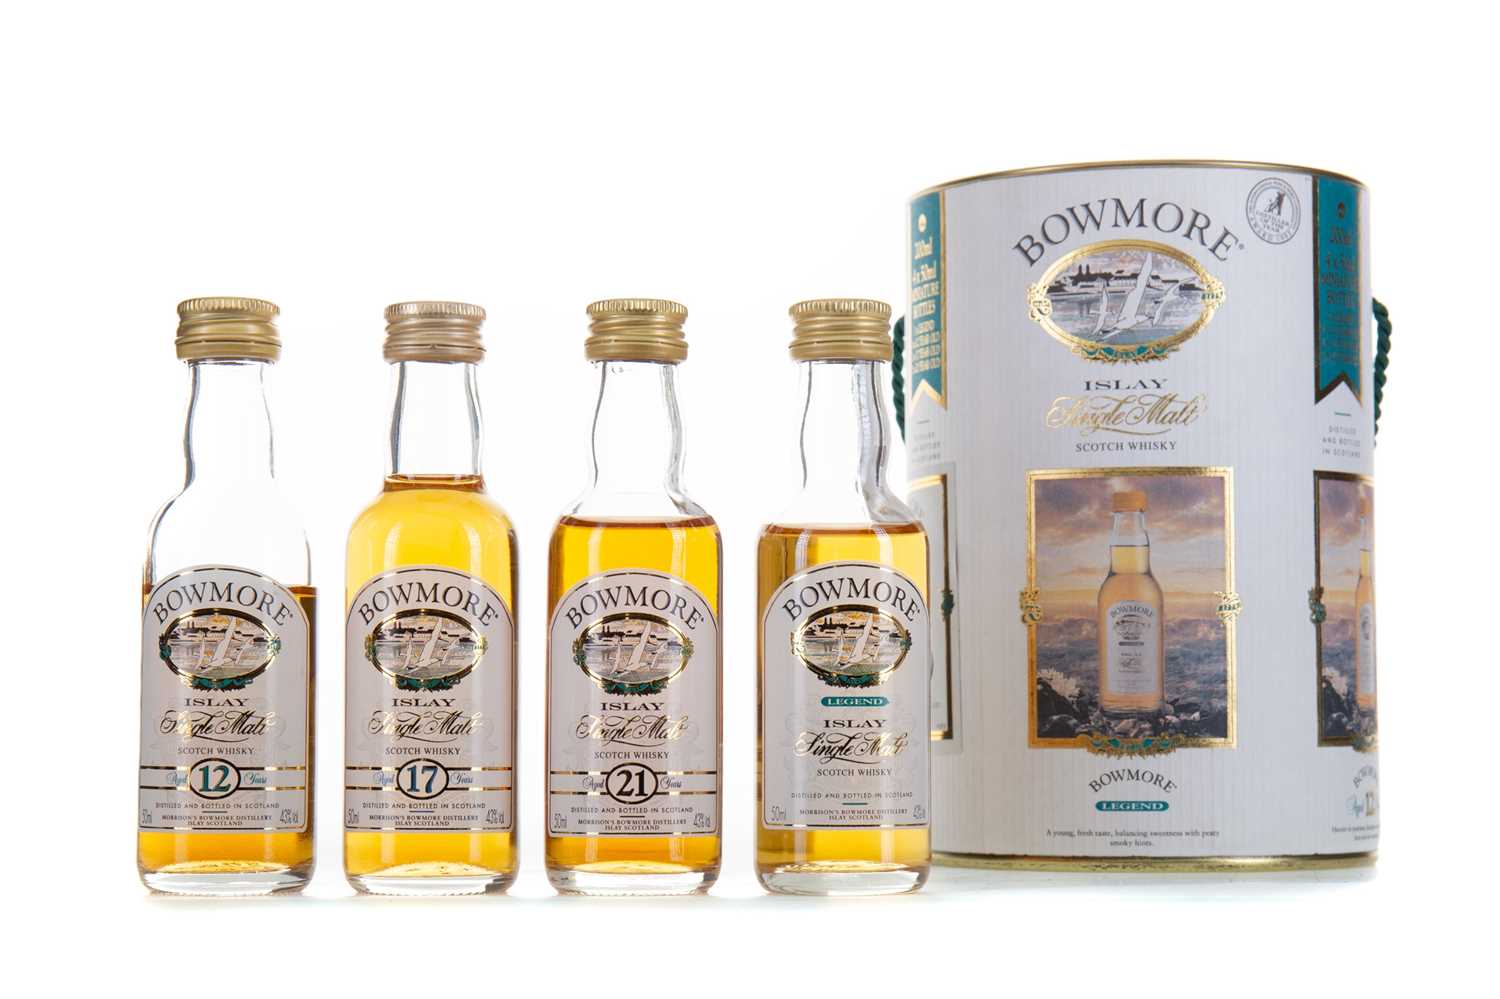 Lot 42 - BOWMORE MINIATURE COLLECTION (4 MINIS) - INCLUDING 21 YEAR OLD